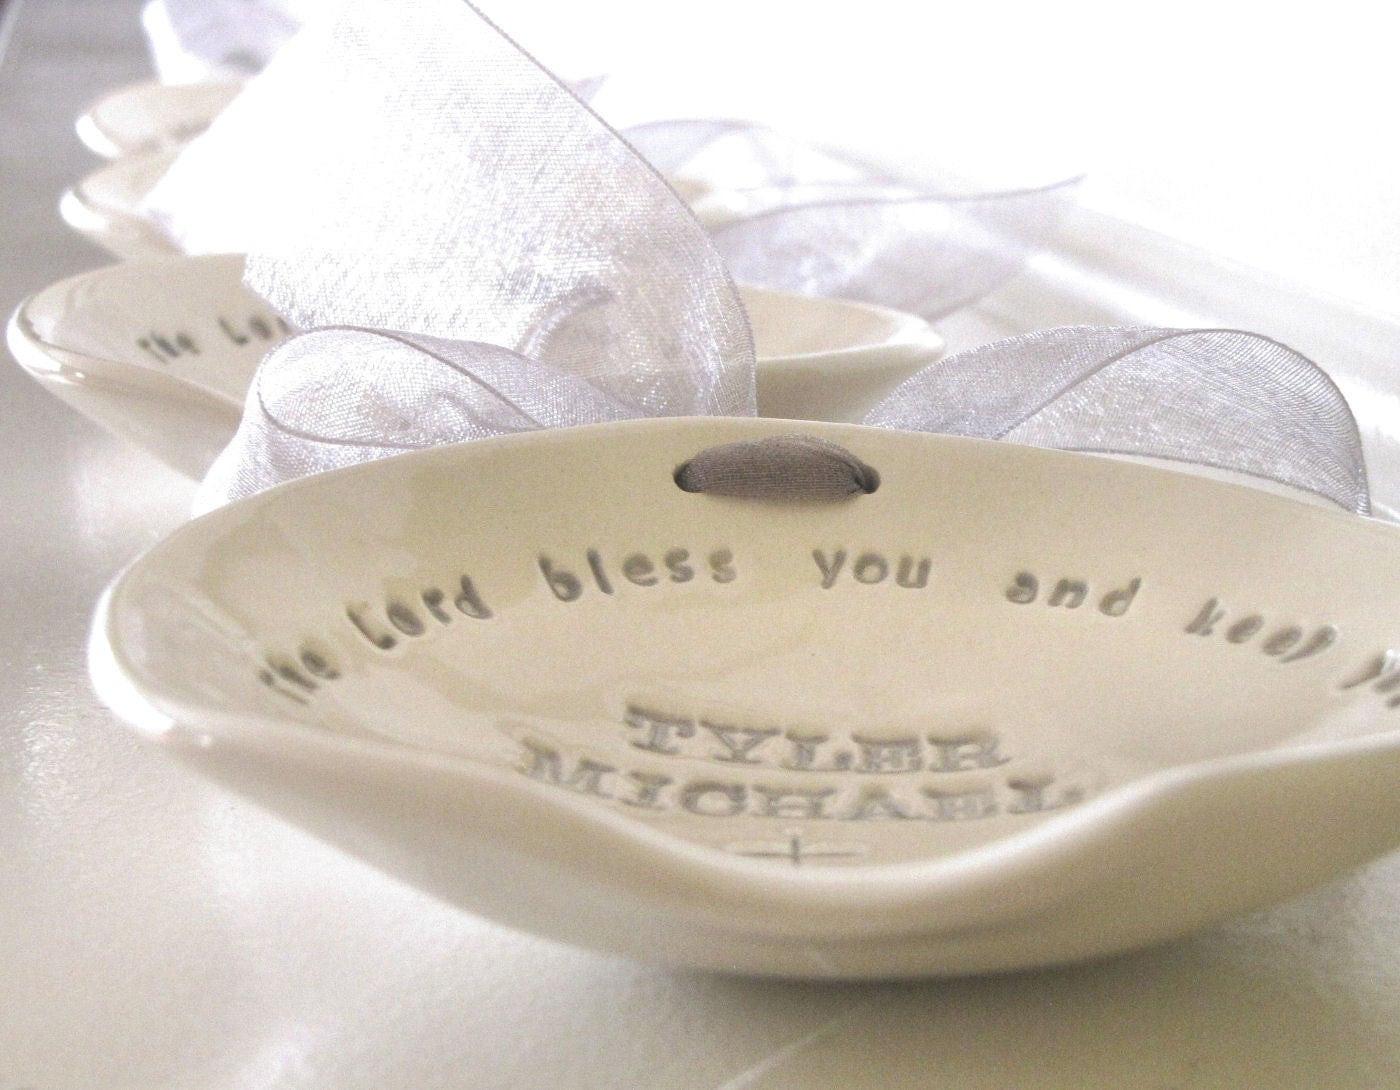 Baptism Gift Ideas For Boys
 Which Baptism Gifts For Boys Are Appropriate